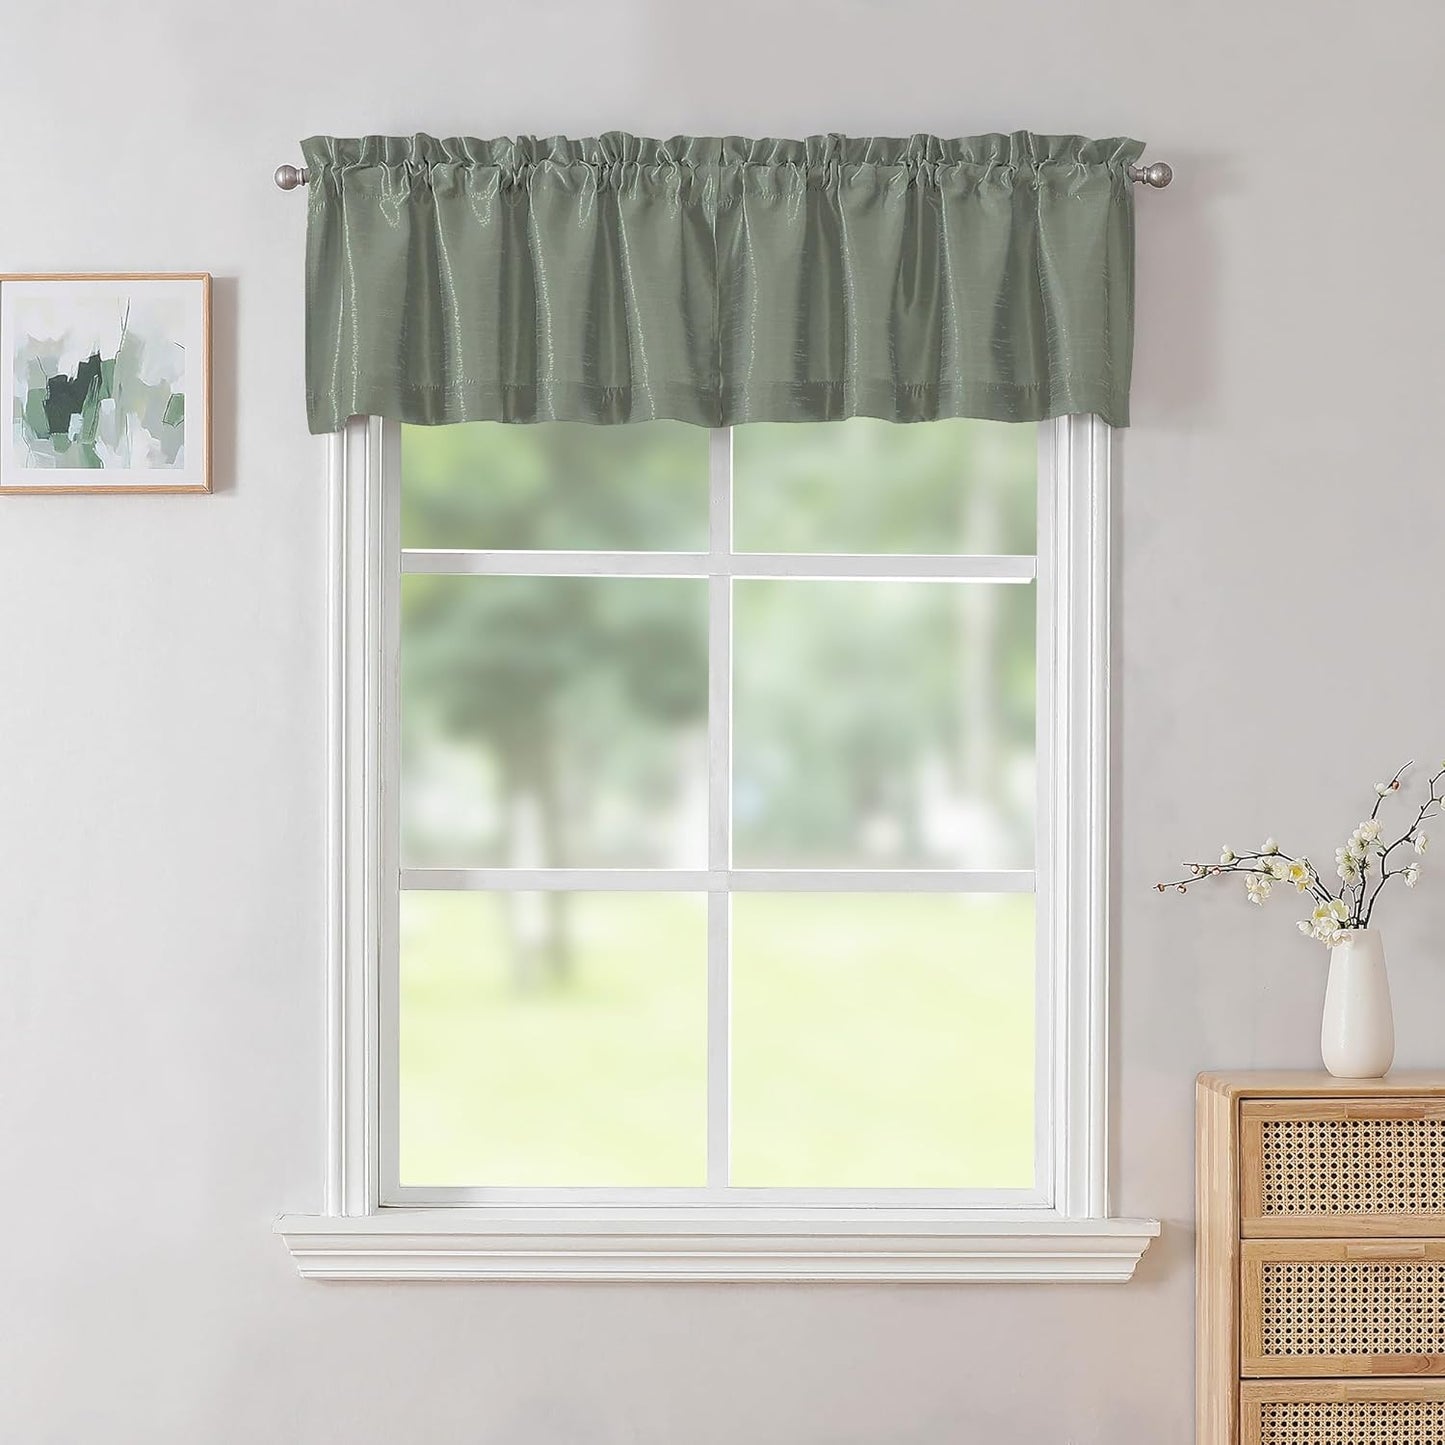 Chyhomenyc Uptown Sage Green Kitchen Curtains 45 Inch Length 2 Panels, Room Darkening Faux Silk Chic Fabric Short Window Curtains for Bedroom Living Room, Each 30Wx45L  Chyhomenyc Sage Green 60"Wx14"L 